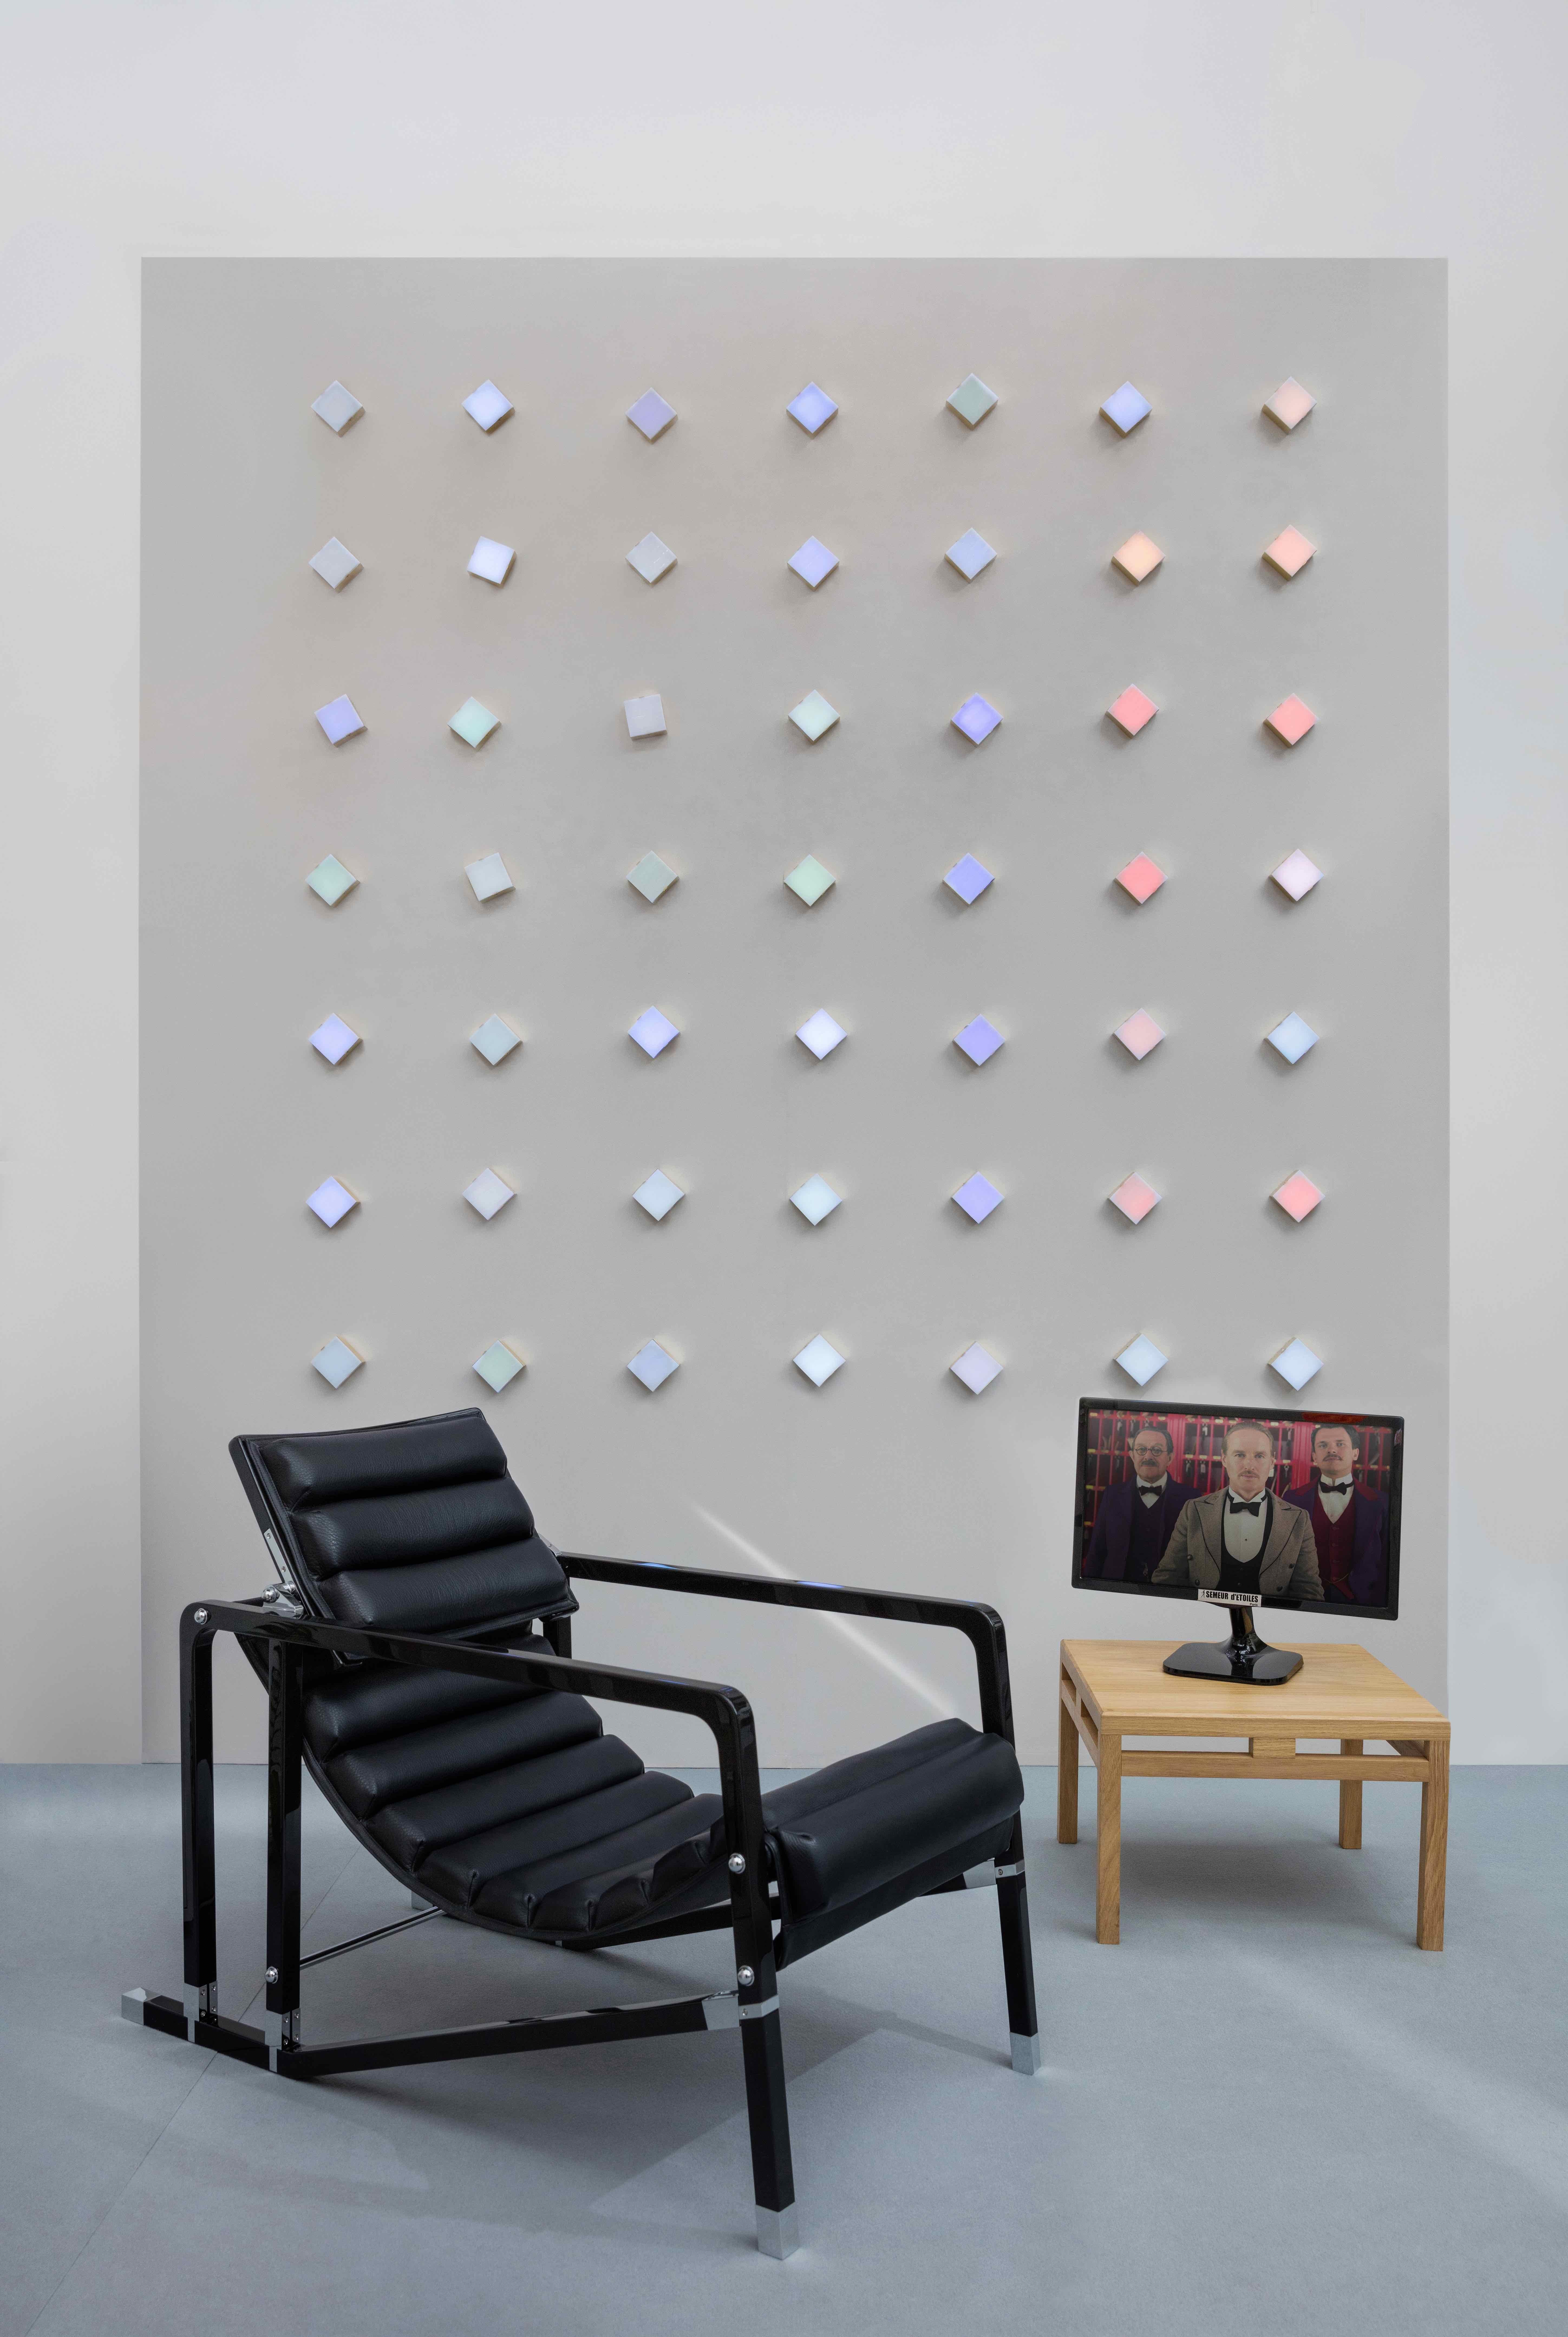 Essence des Choses wall art, Ludovic Clément d’Armont
Dimensions: W 247 x D 7 x H 285 cm
Materials: Brass, Glass, LEDs

The wall reproduces / evokes the colored variations of the video you choose.

Every creation of Ludovic Clément d’Armont